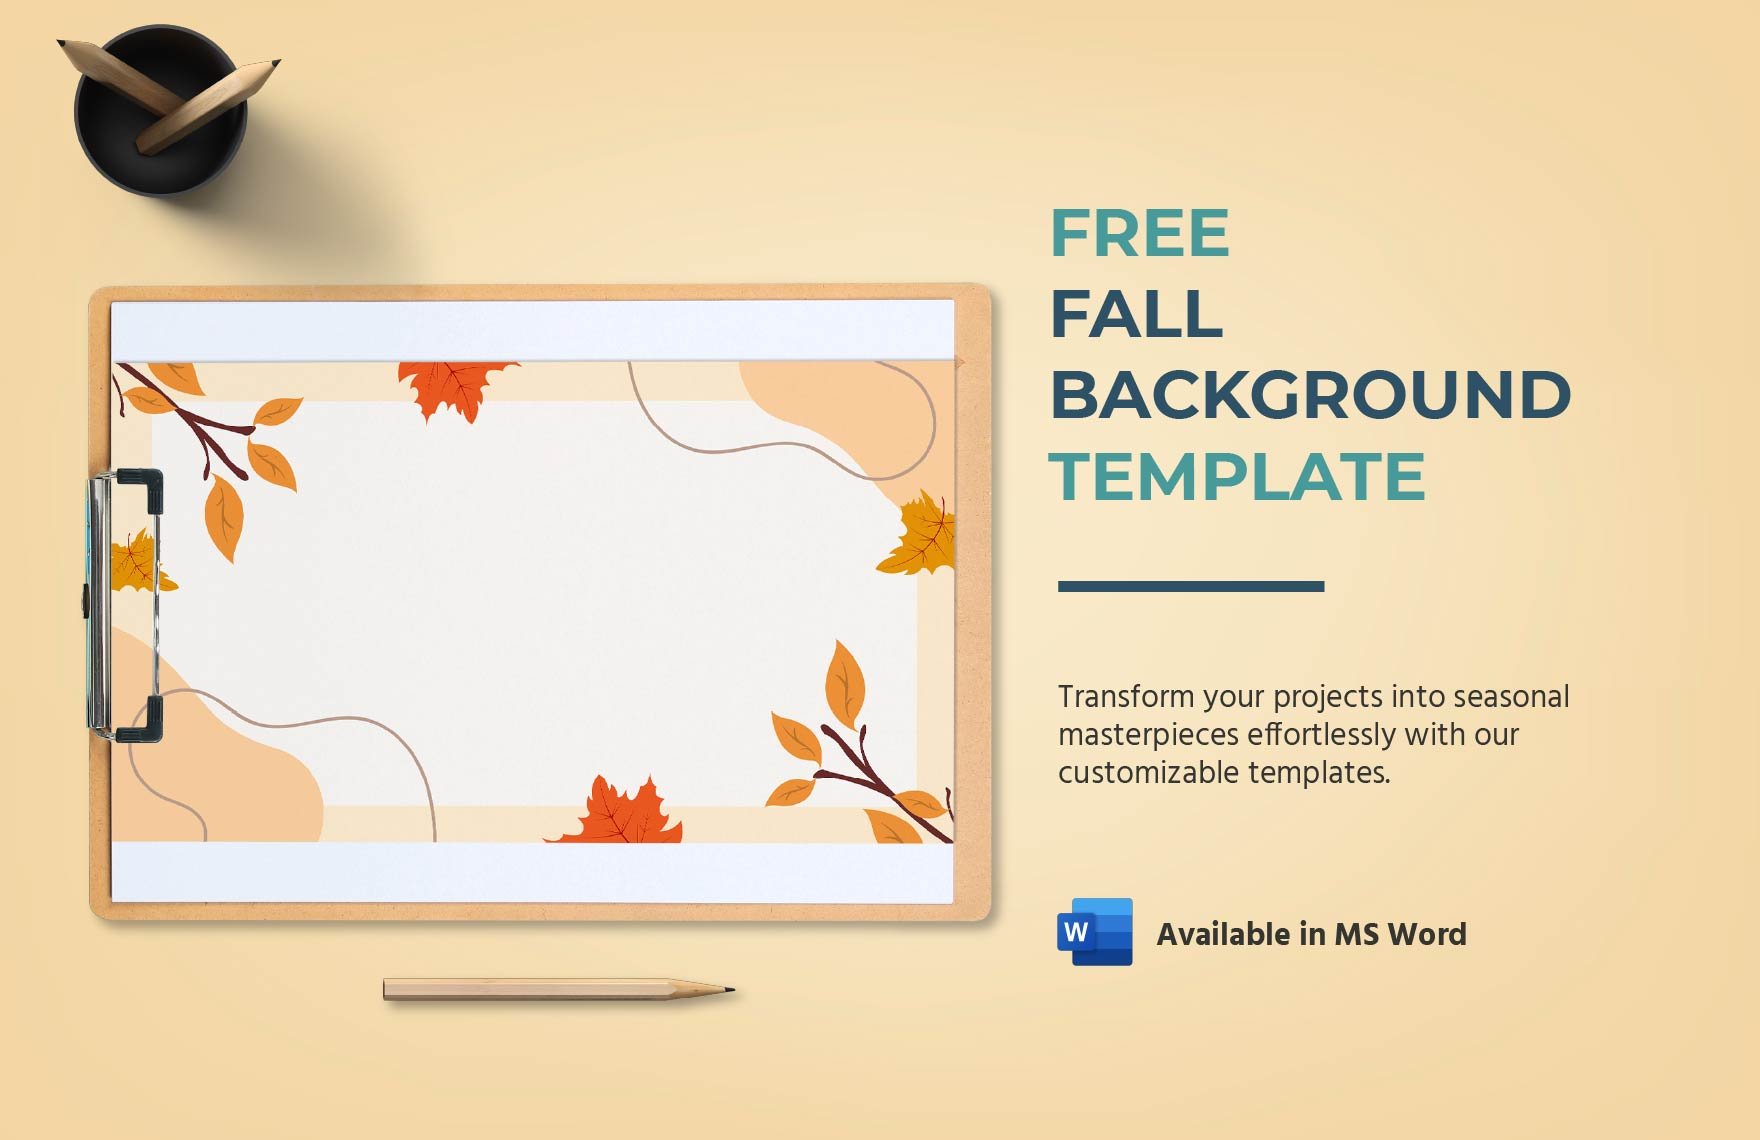 Free and customizable background templates